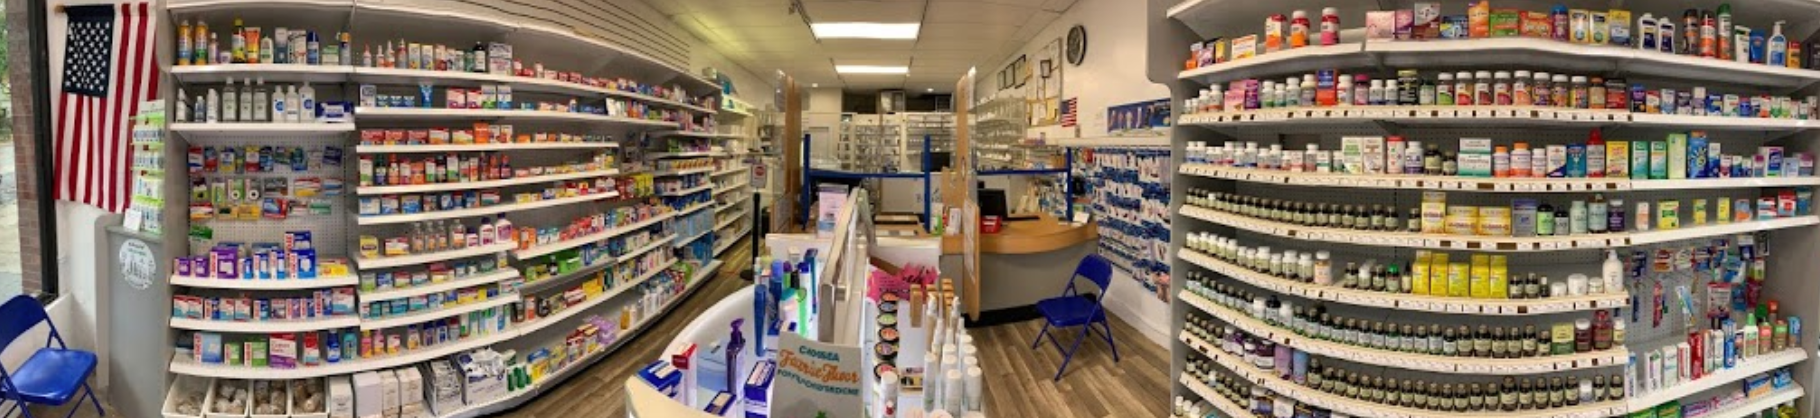 Welcome To Bluejay Pharmacy & Medical Supply